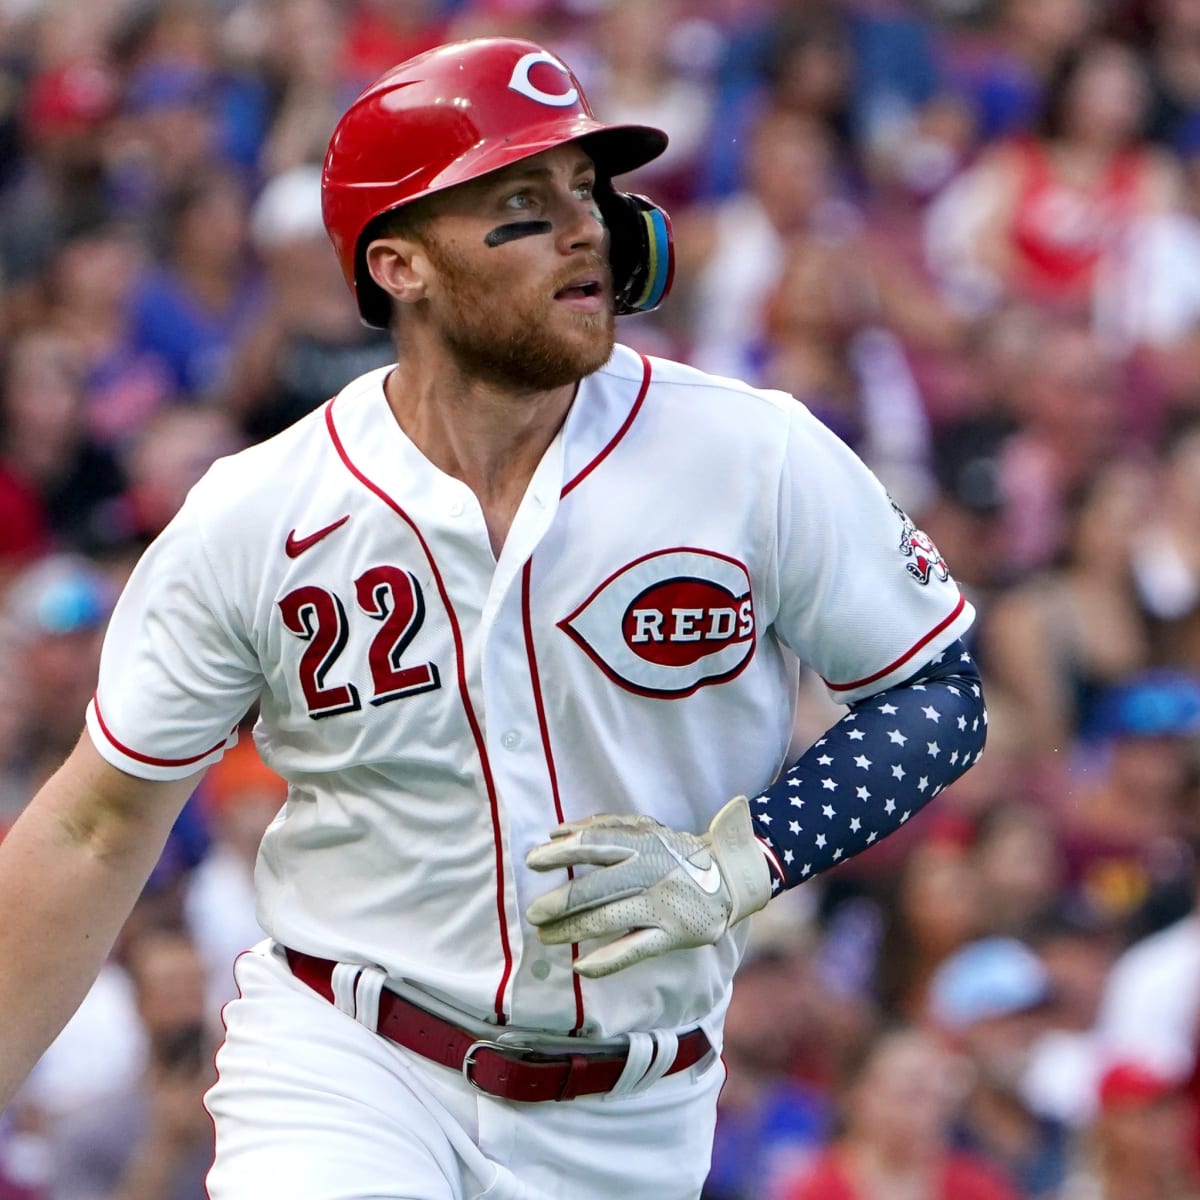 Reds: Brandon Drury has solidified his roster spot